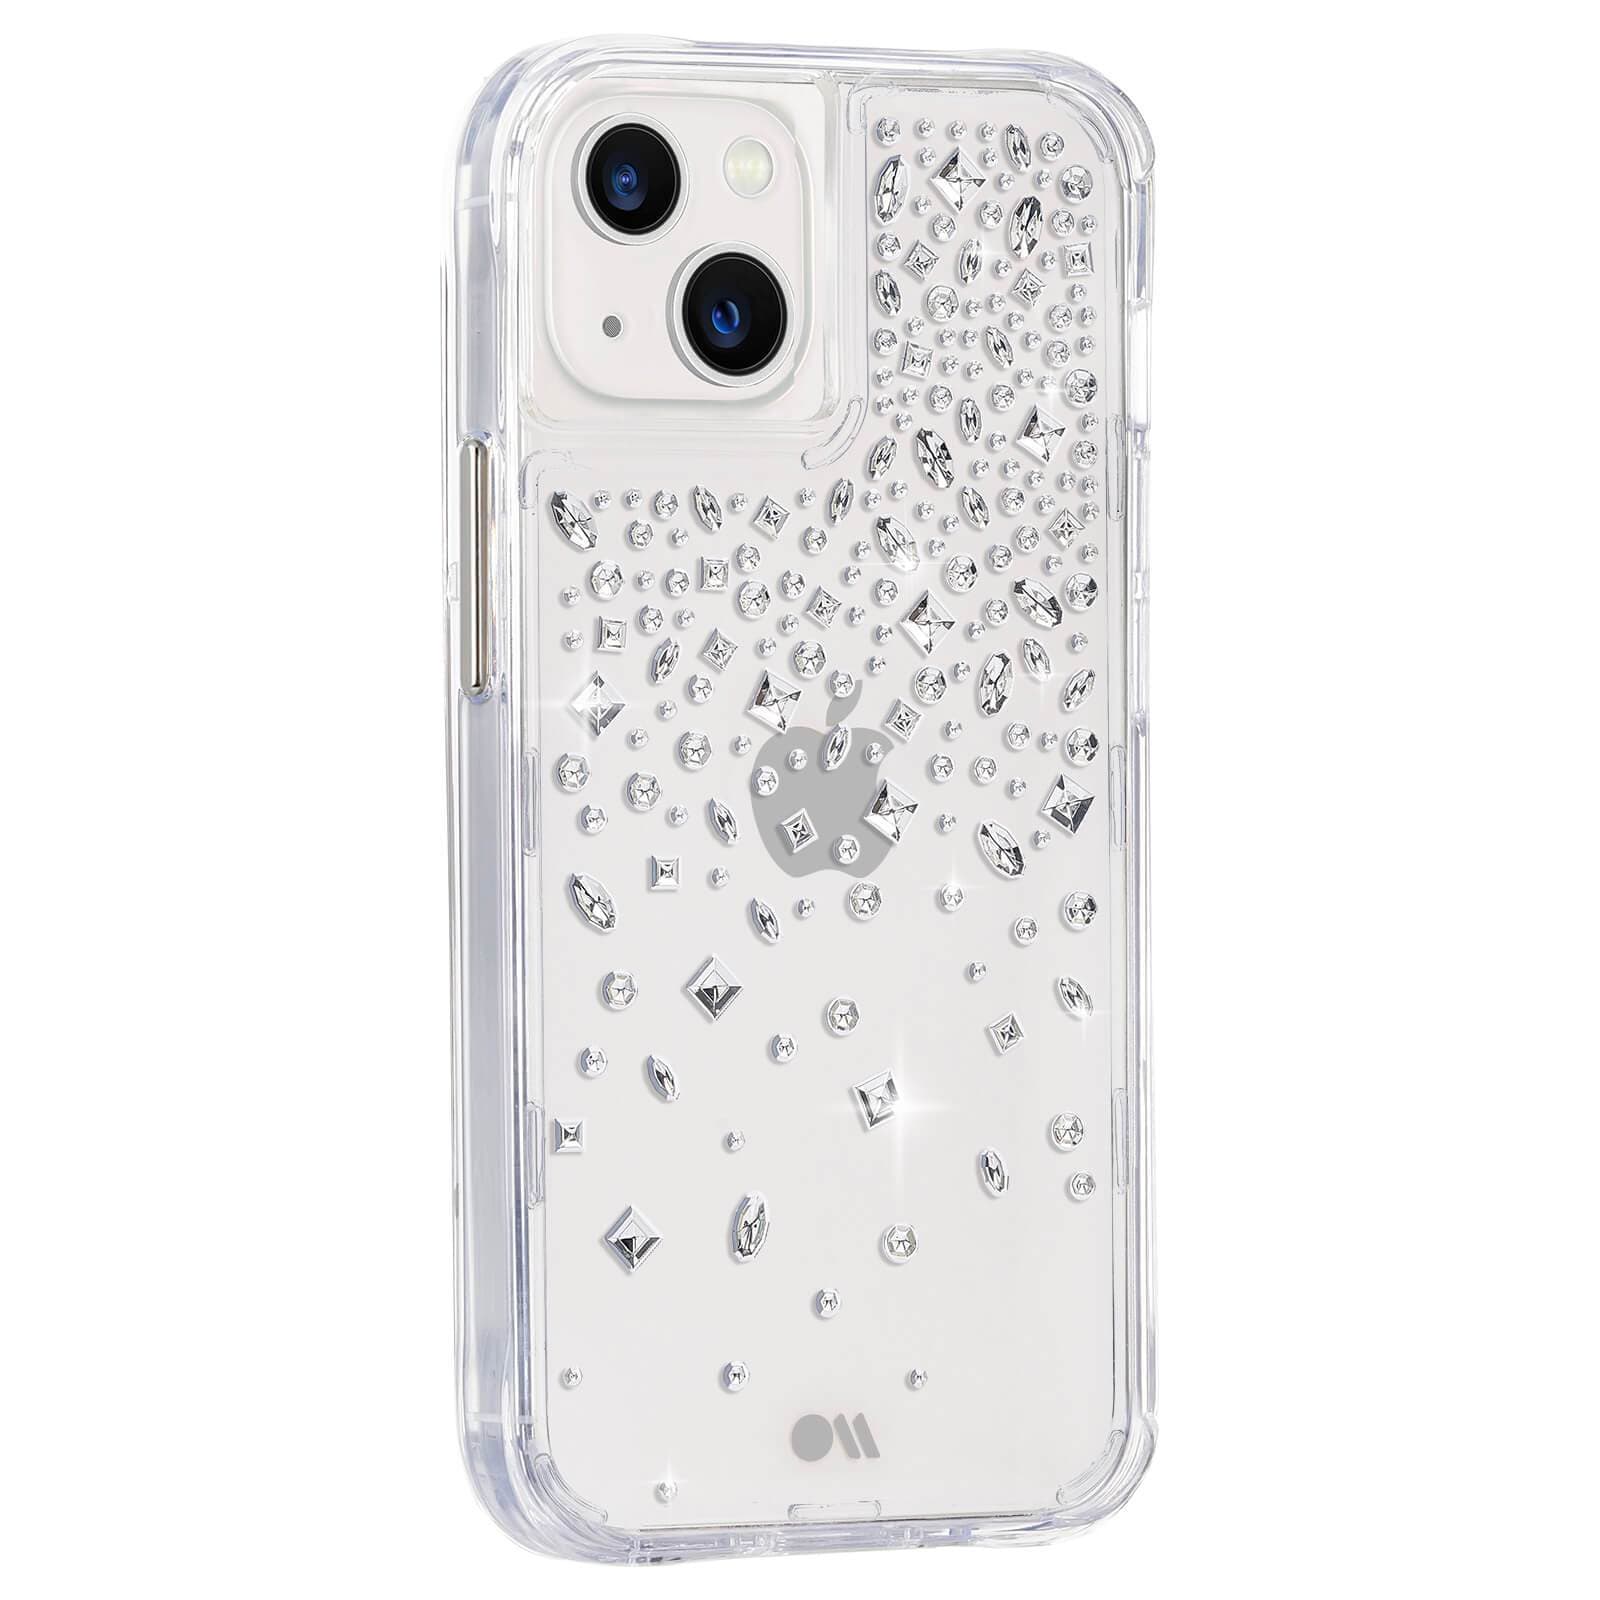 Clear case with gems embedded in. color::Karat Crystal